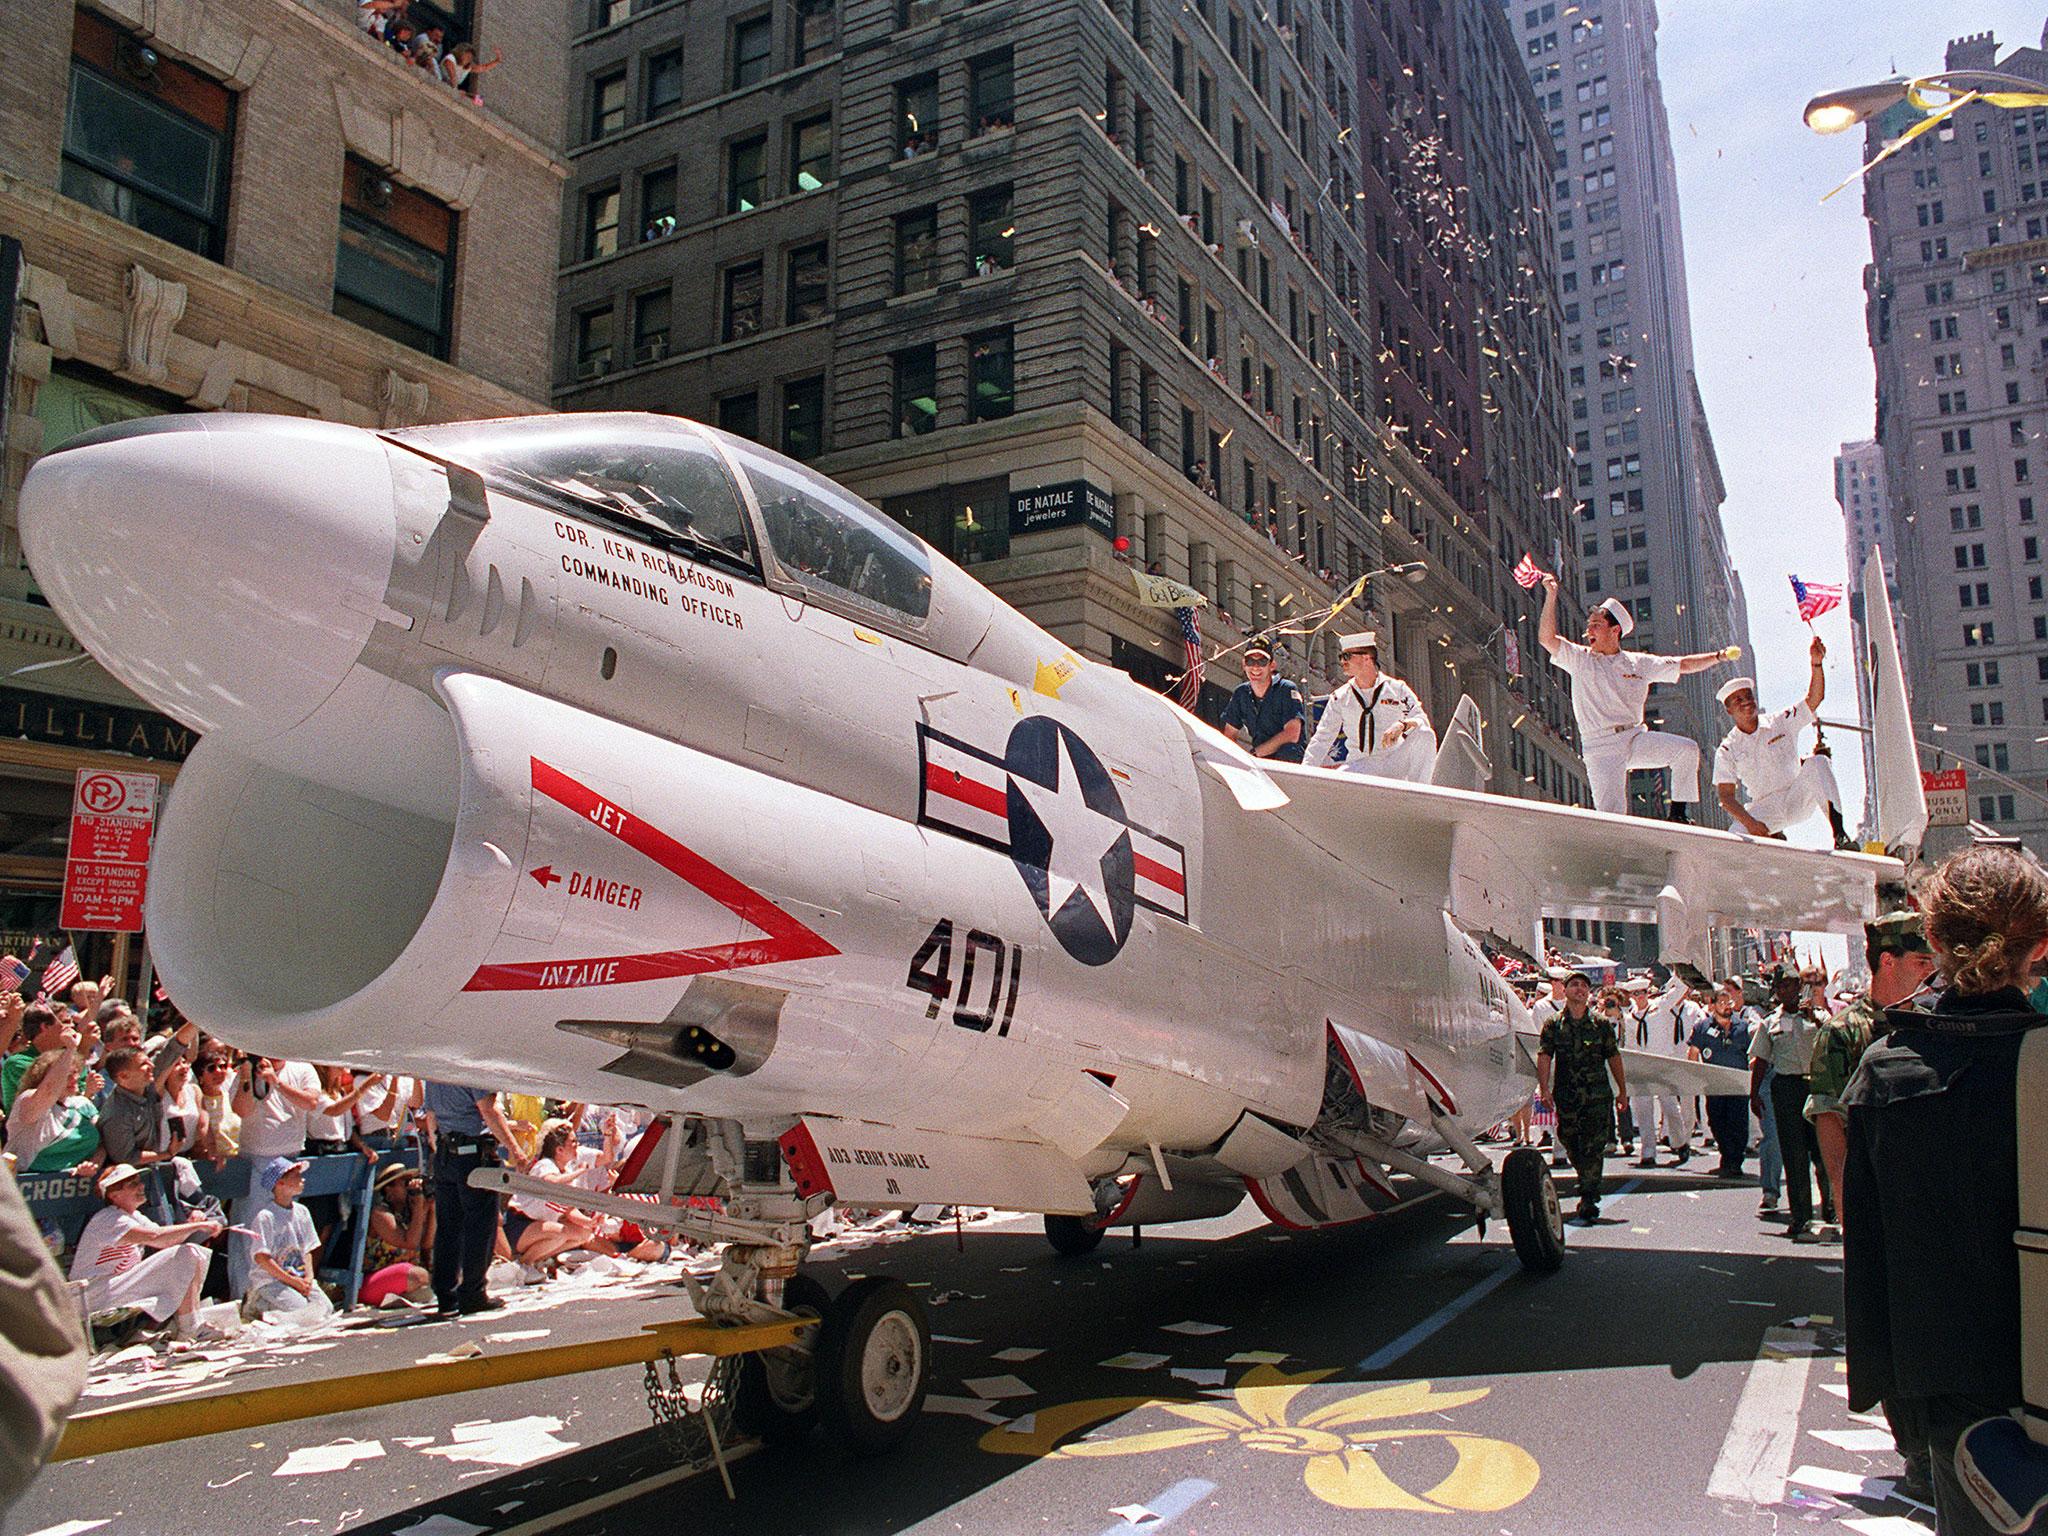 A Navy A-7 Corsair jet is pulled down Broadway Avenue as sailors rejoice on the wings during the Operation Welcome Home parade for returning Gulf War troops, when an estimated one million people came to welcome some 24,000 Desert Storm veterans